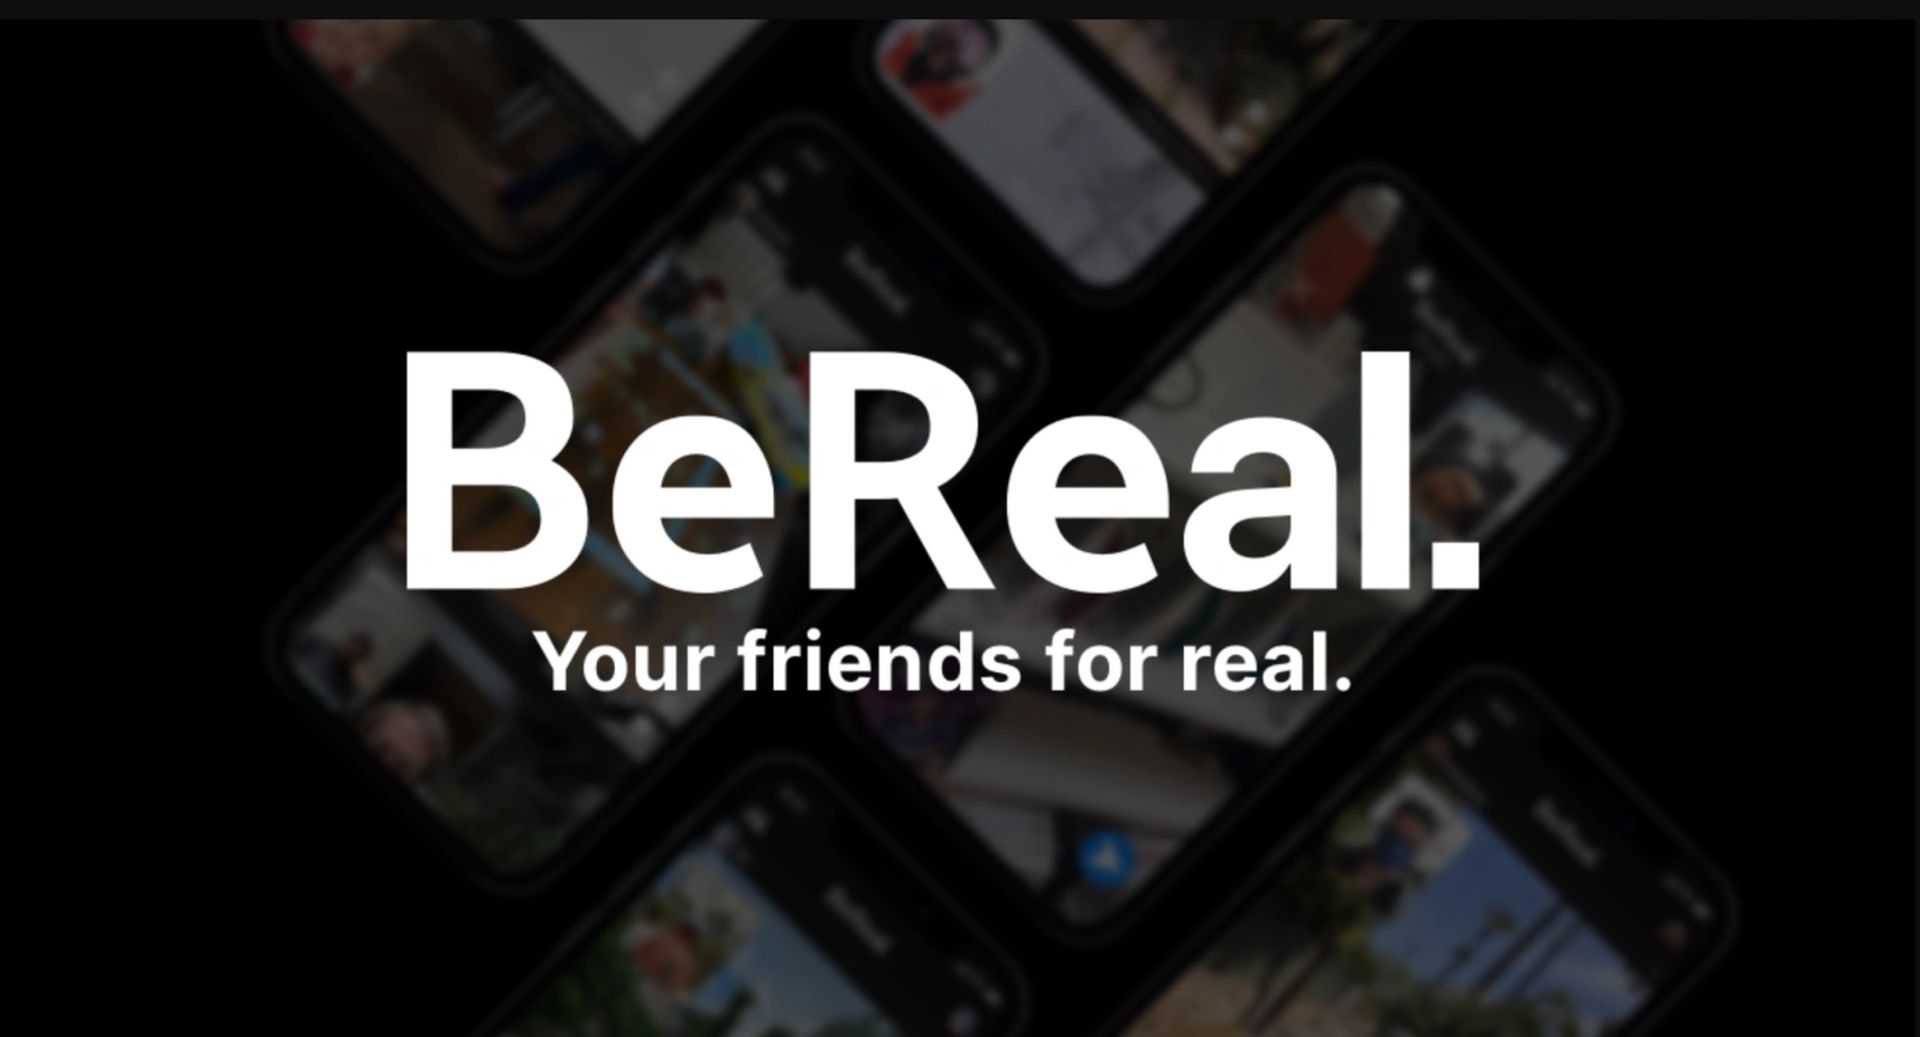 In this article, we are going to be covering how to fix BeReal friend request not working, so you can keep using the popular social media app with no issues.